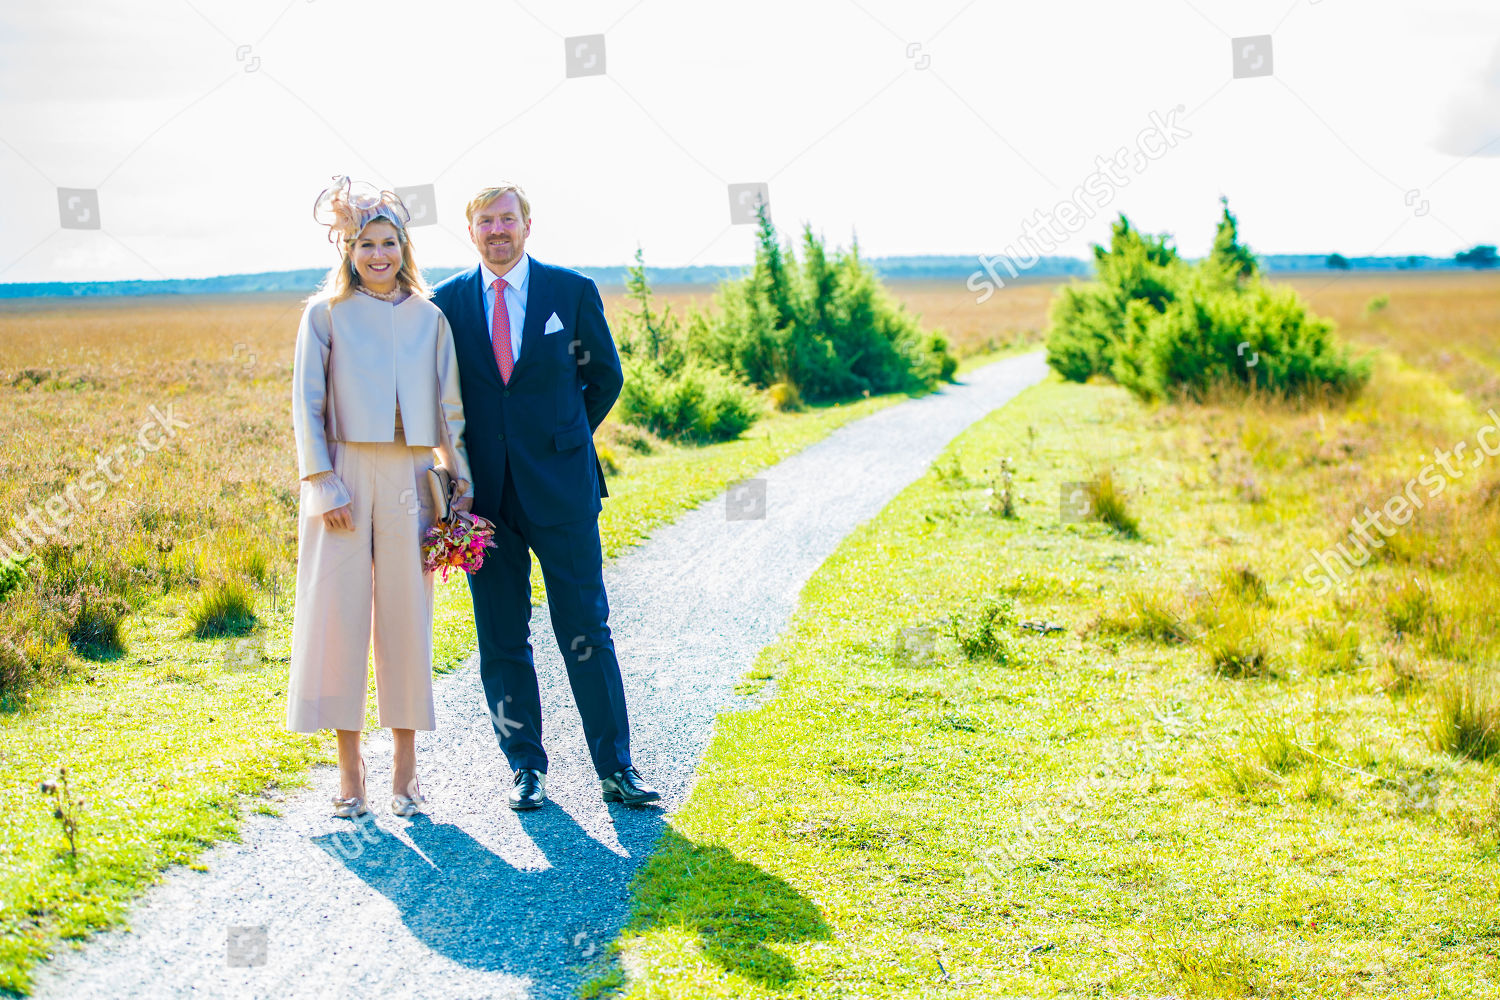 king-willem-alexander-and-queen-maxima-visit-to-south-west-drenthe-netherlands-shutterstock-editorial-10417139y.jpg